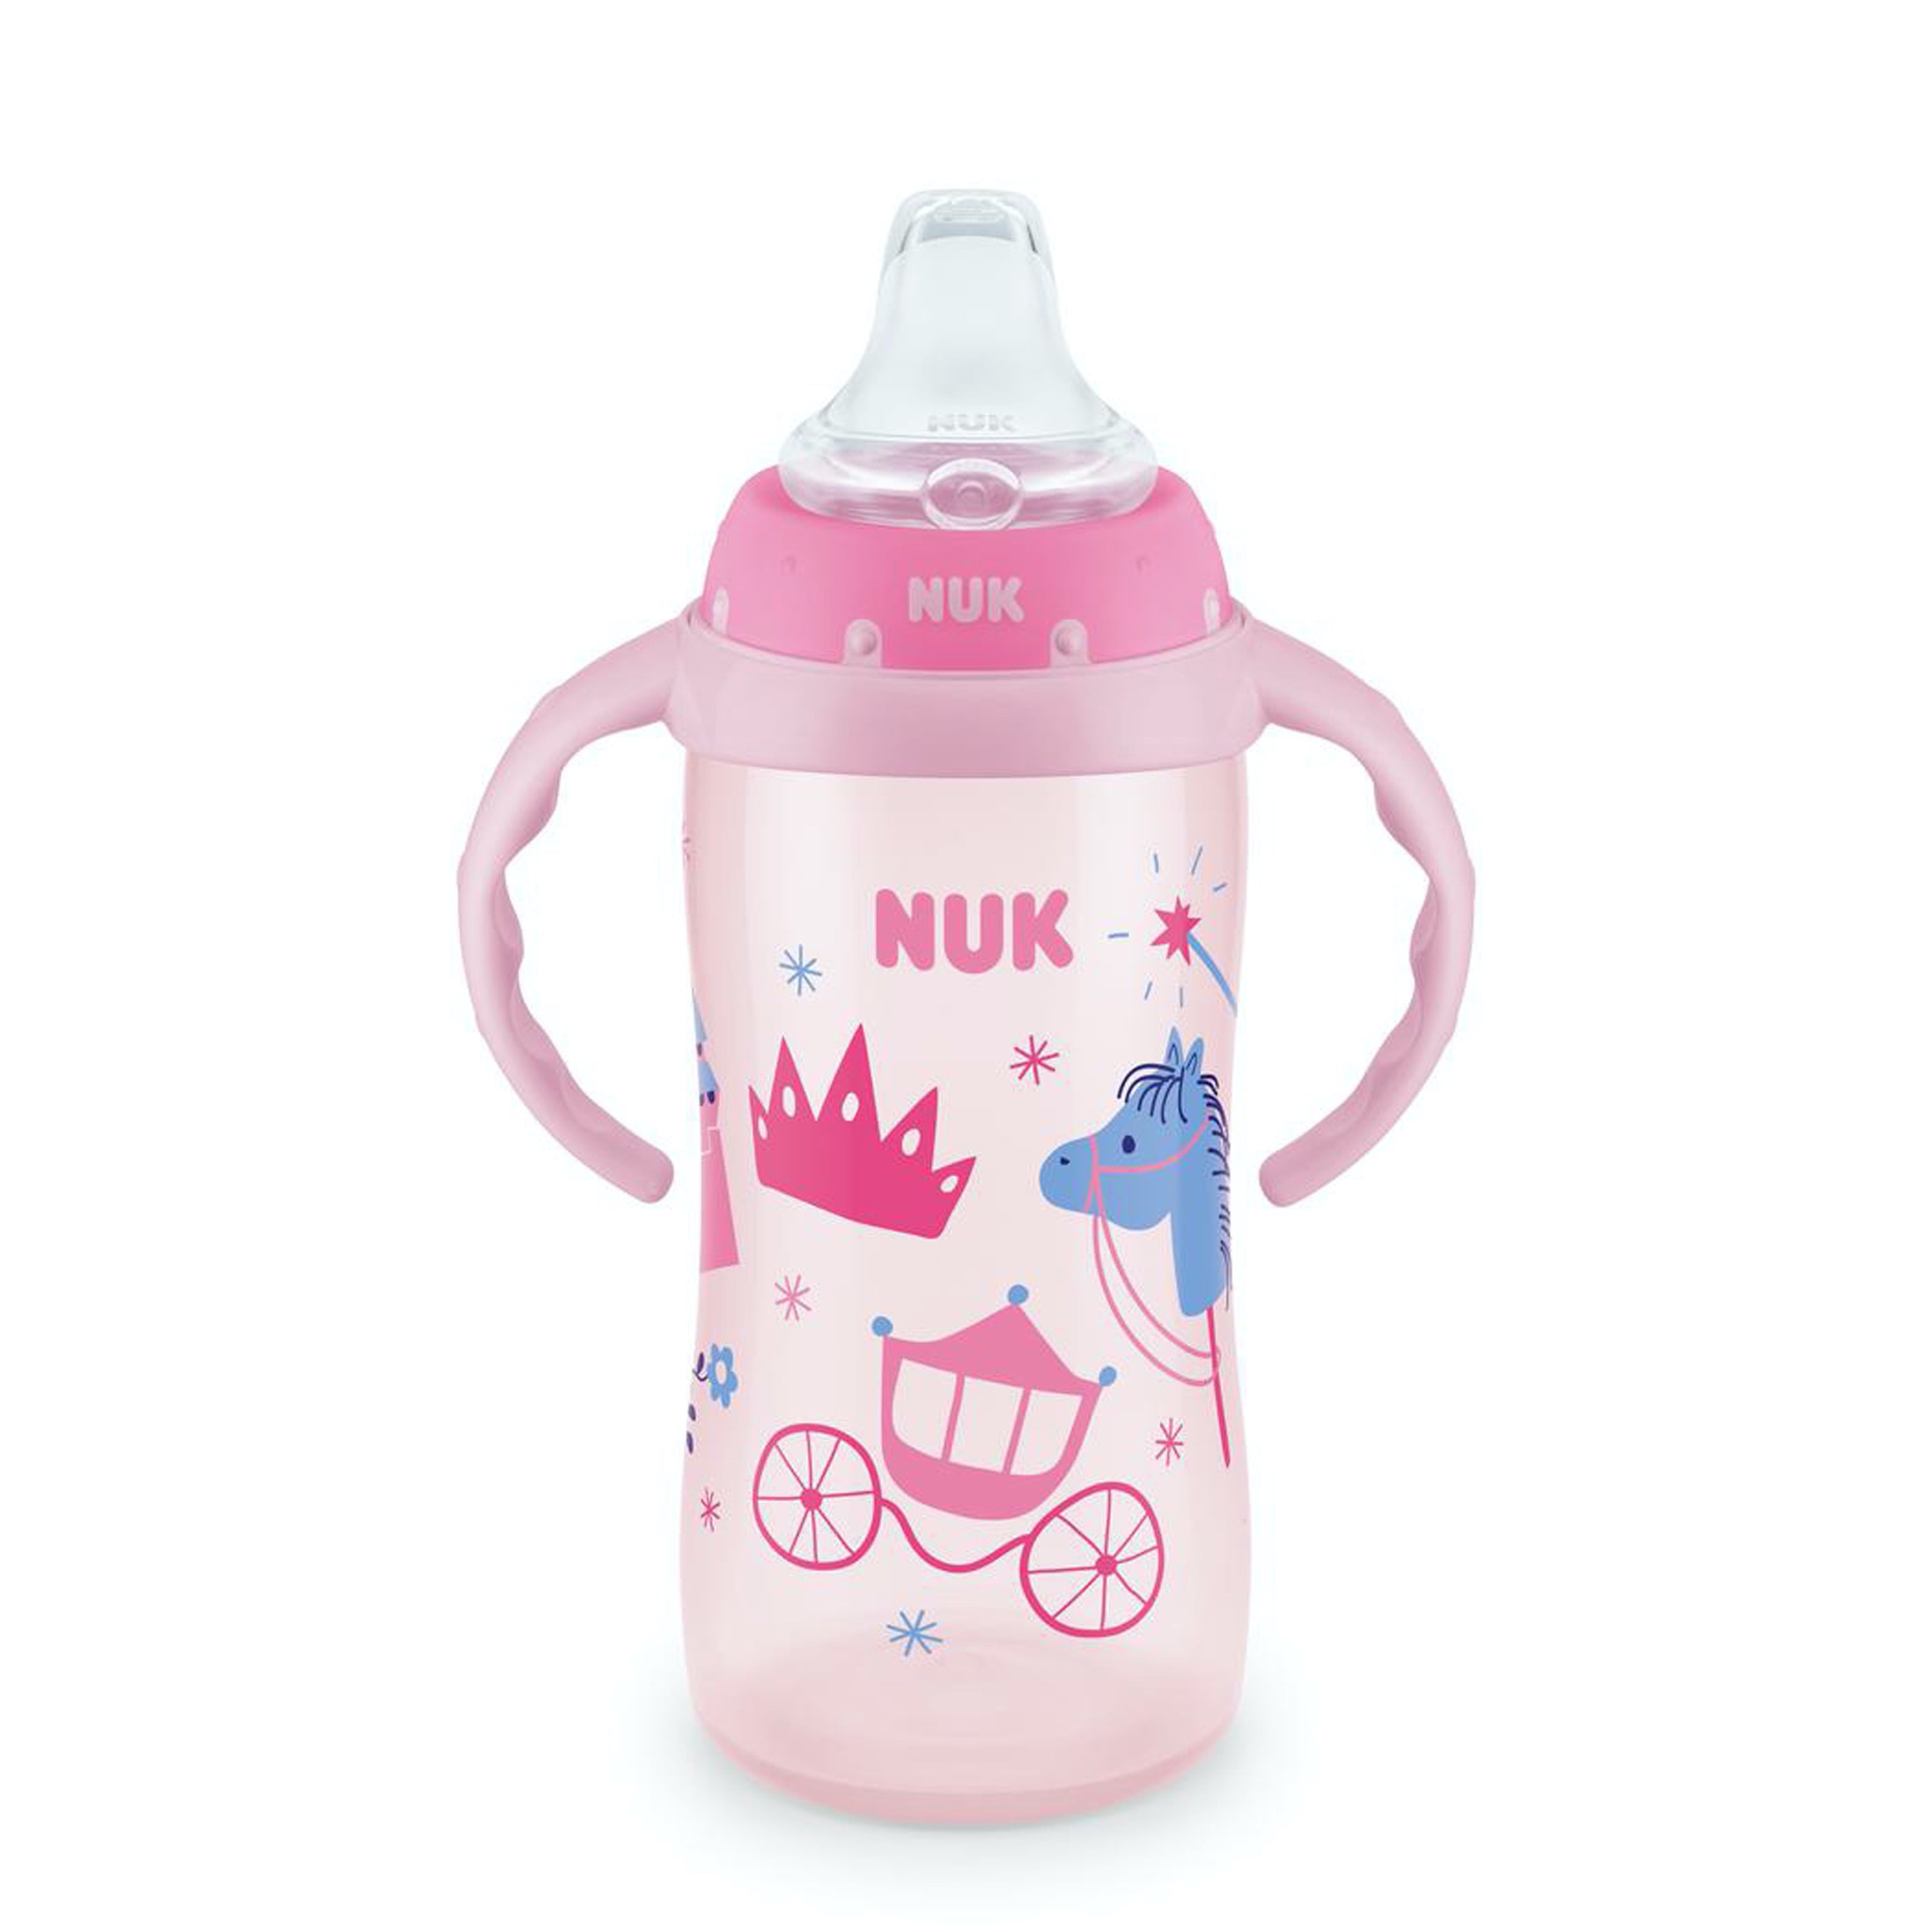 Pobi Cup 260ml - Powder Pink Stainless Steel Toddler Cup